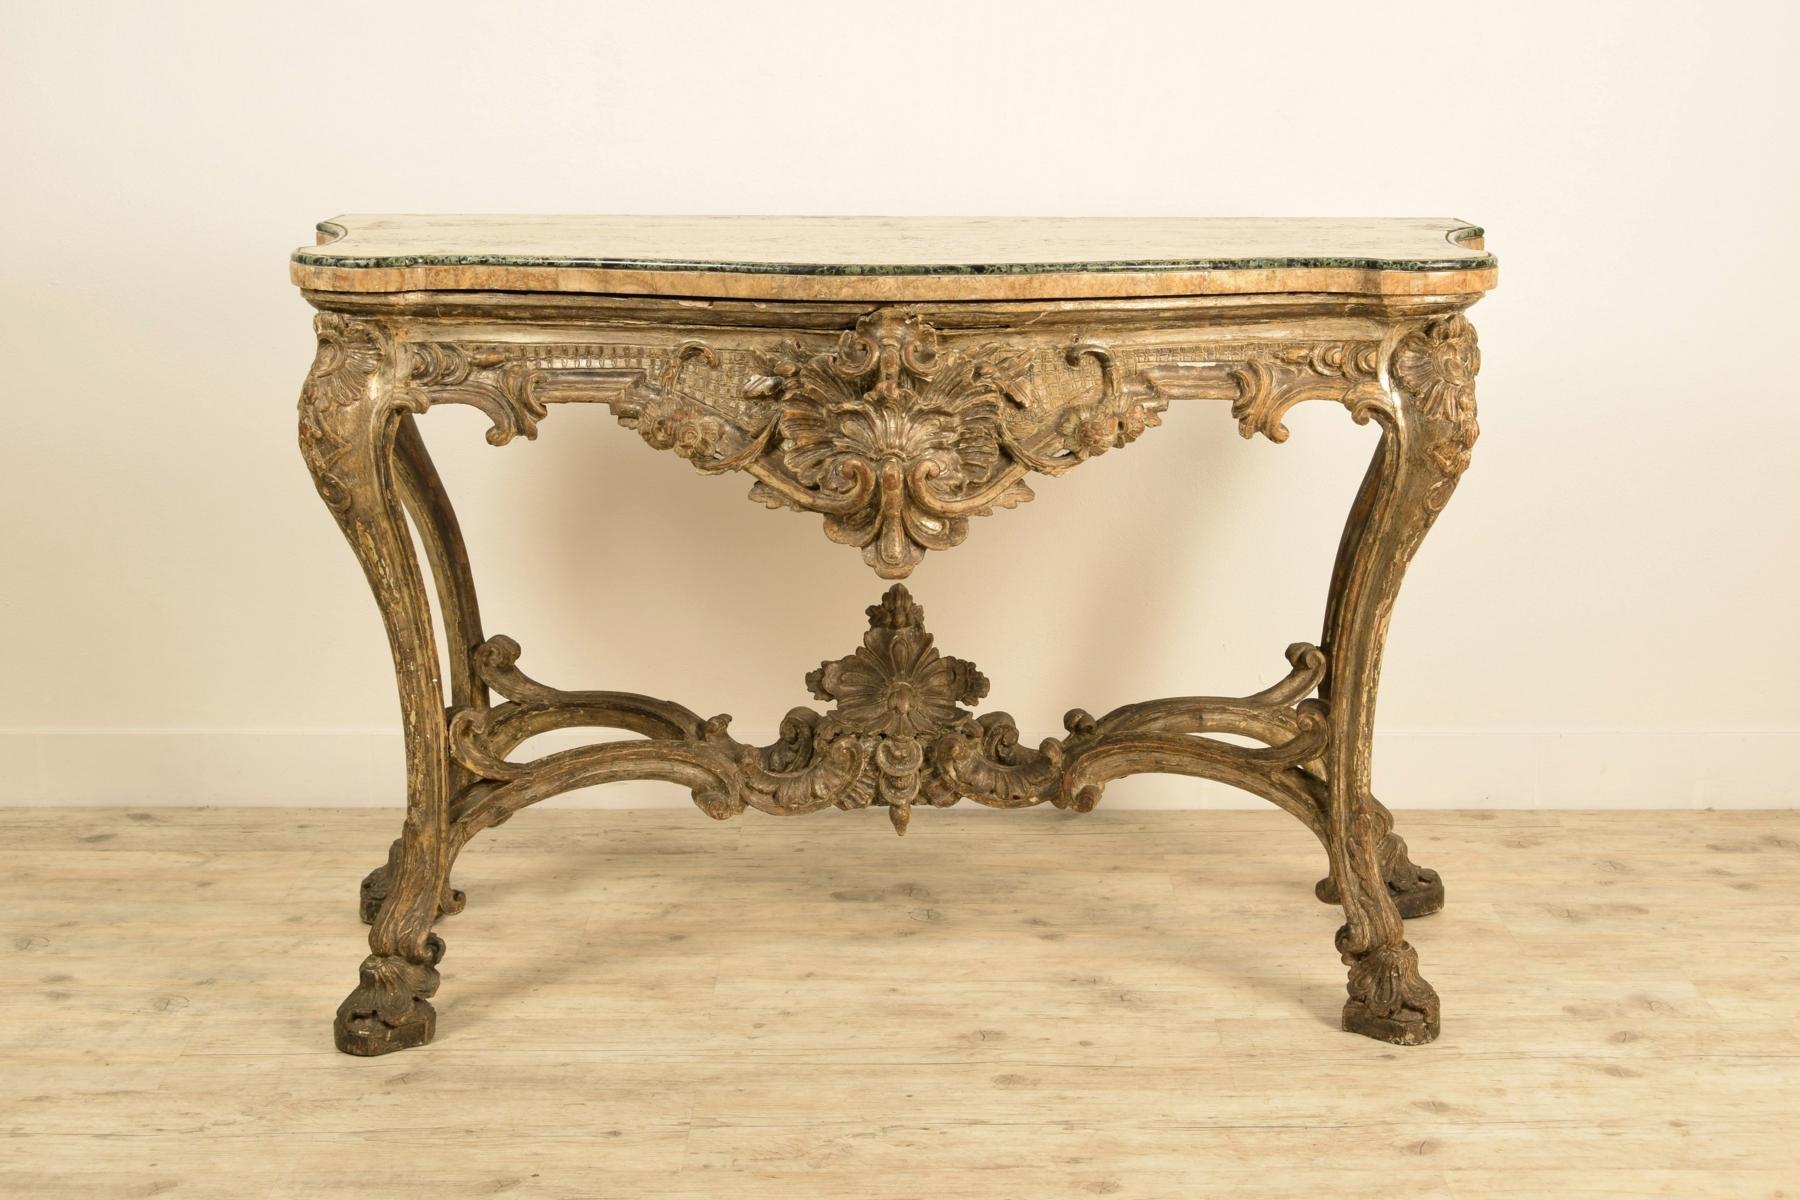 Italian carved and silvered wood console
Naples, Italy, early 18th century

This finely carved and silvered wooden console table is a remarkable example of the decorative repertoire typical of Louis XIV, with elements of particular sumptuousness